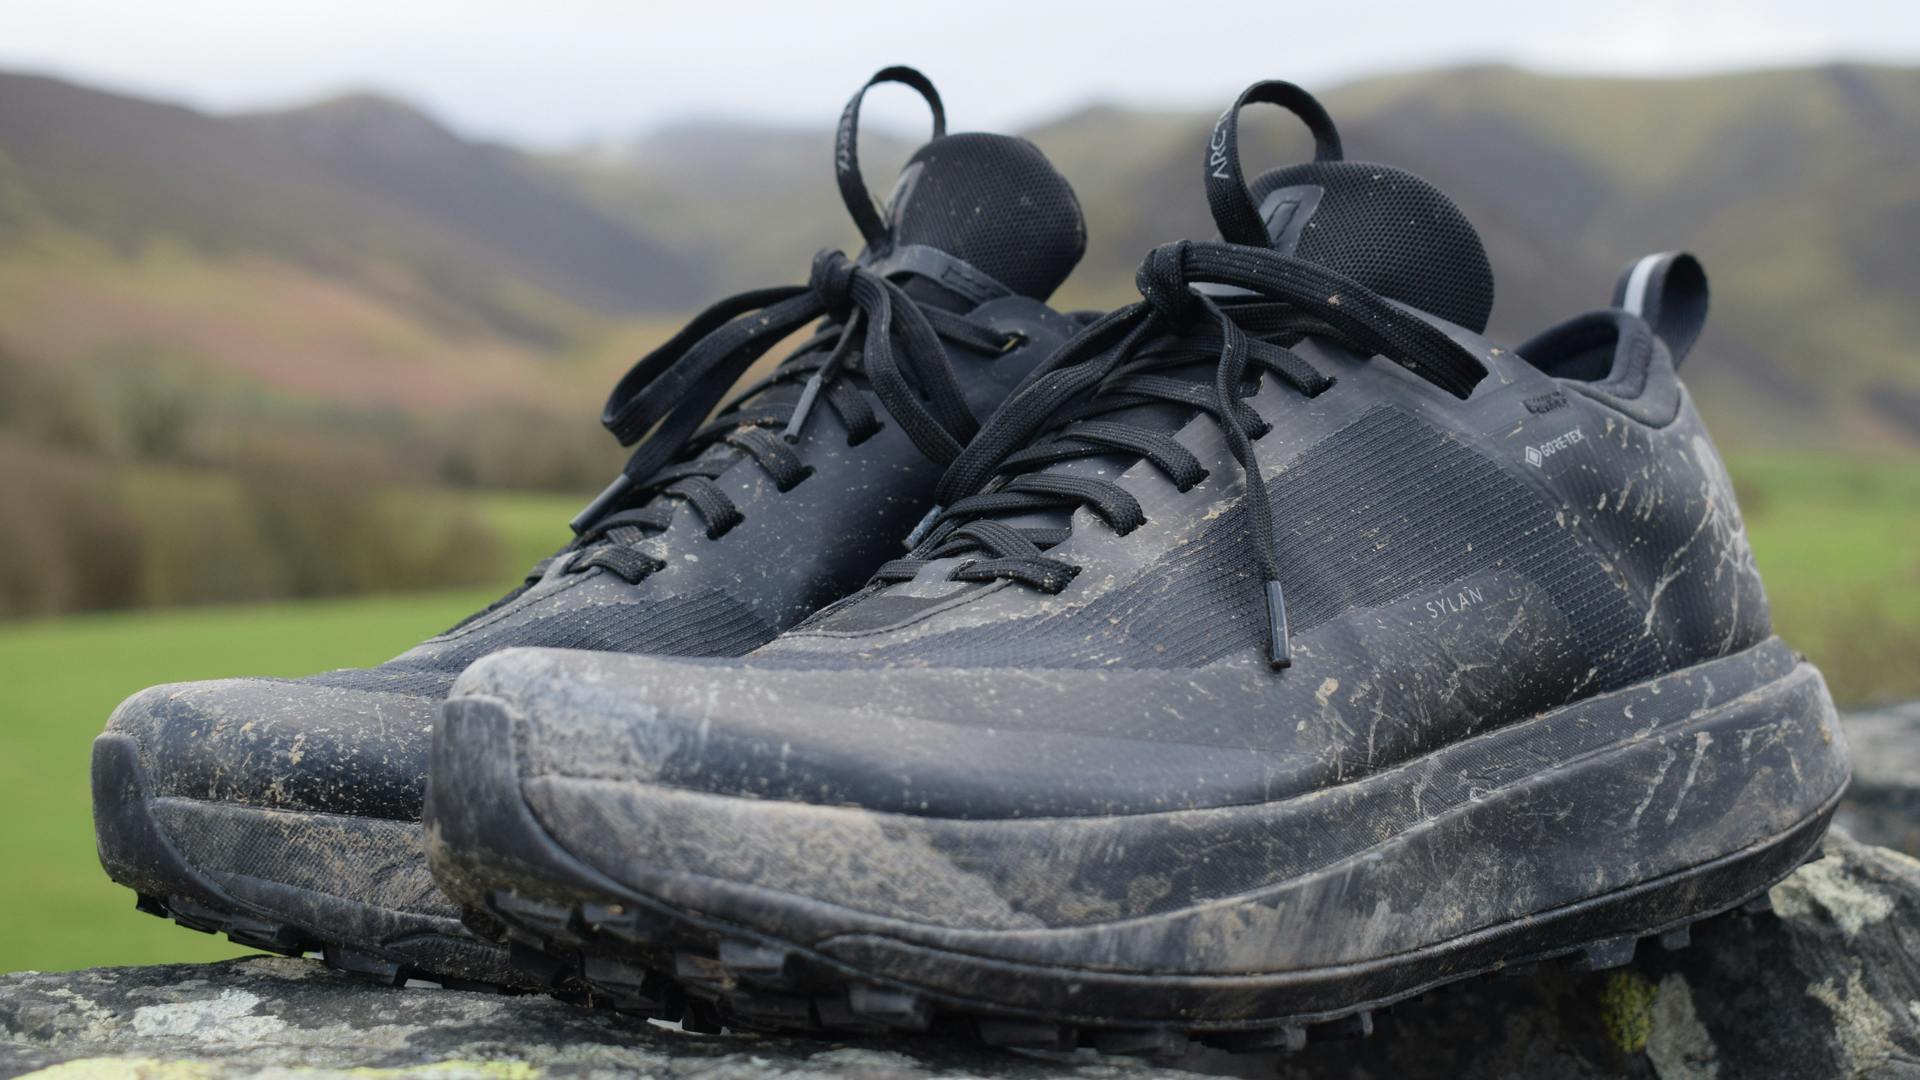 Arc'teryx Sylan trail running shoe | Tested and reviewed